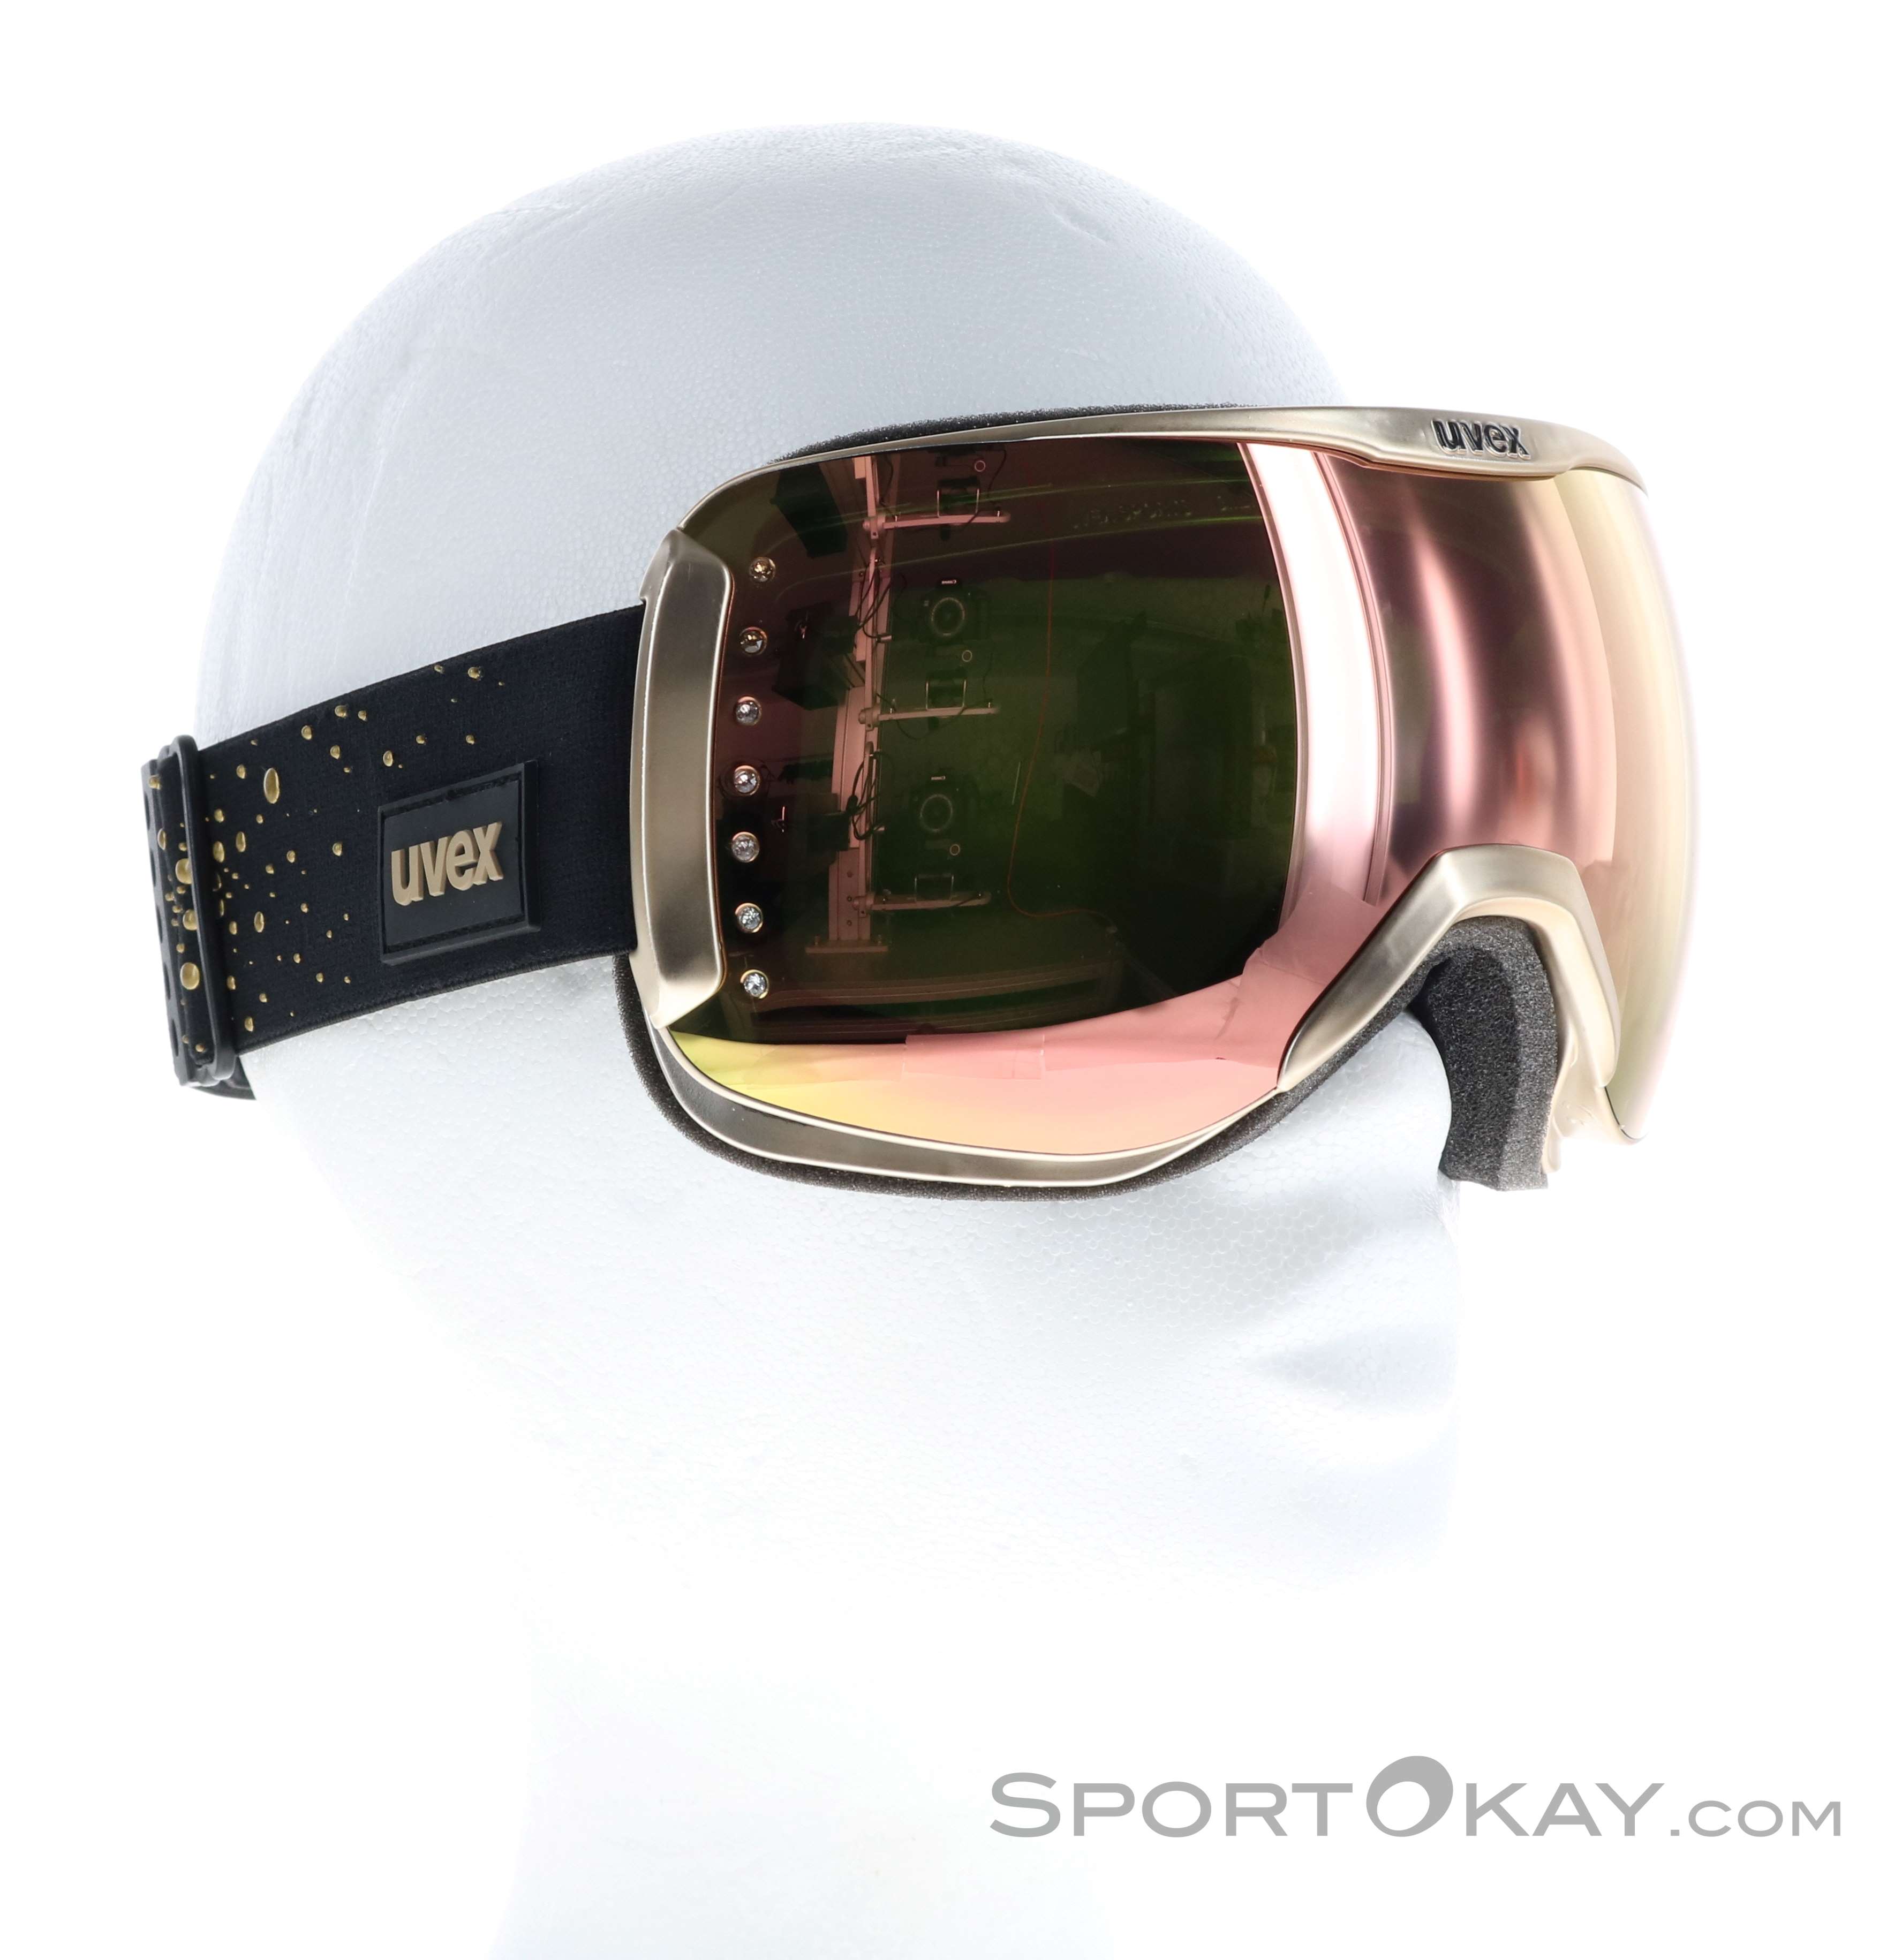 Uvex Downhill 2100 WE Glamour Skibrille-Gold-One Size